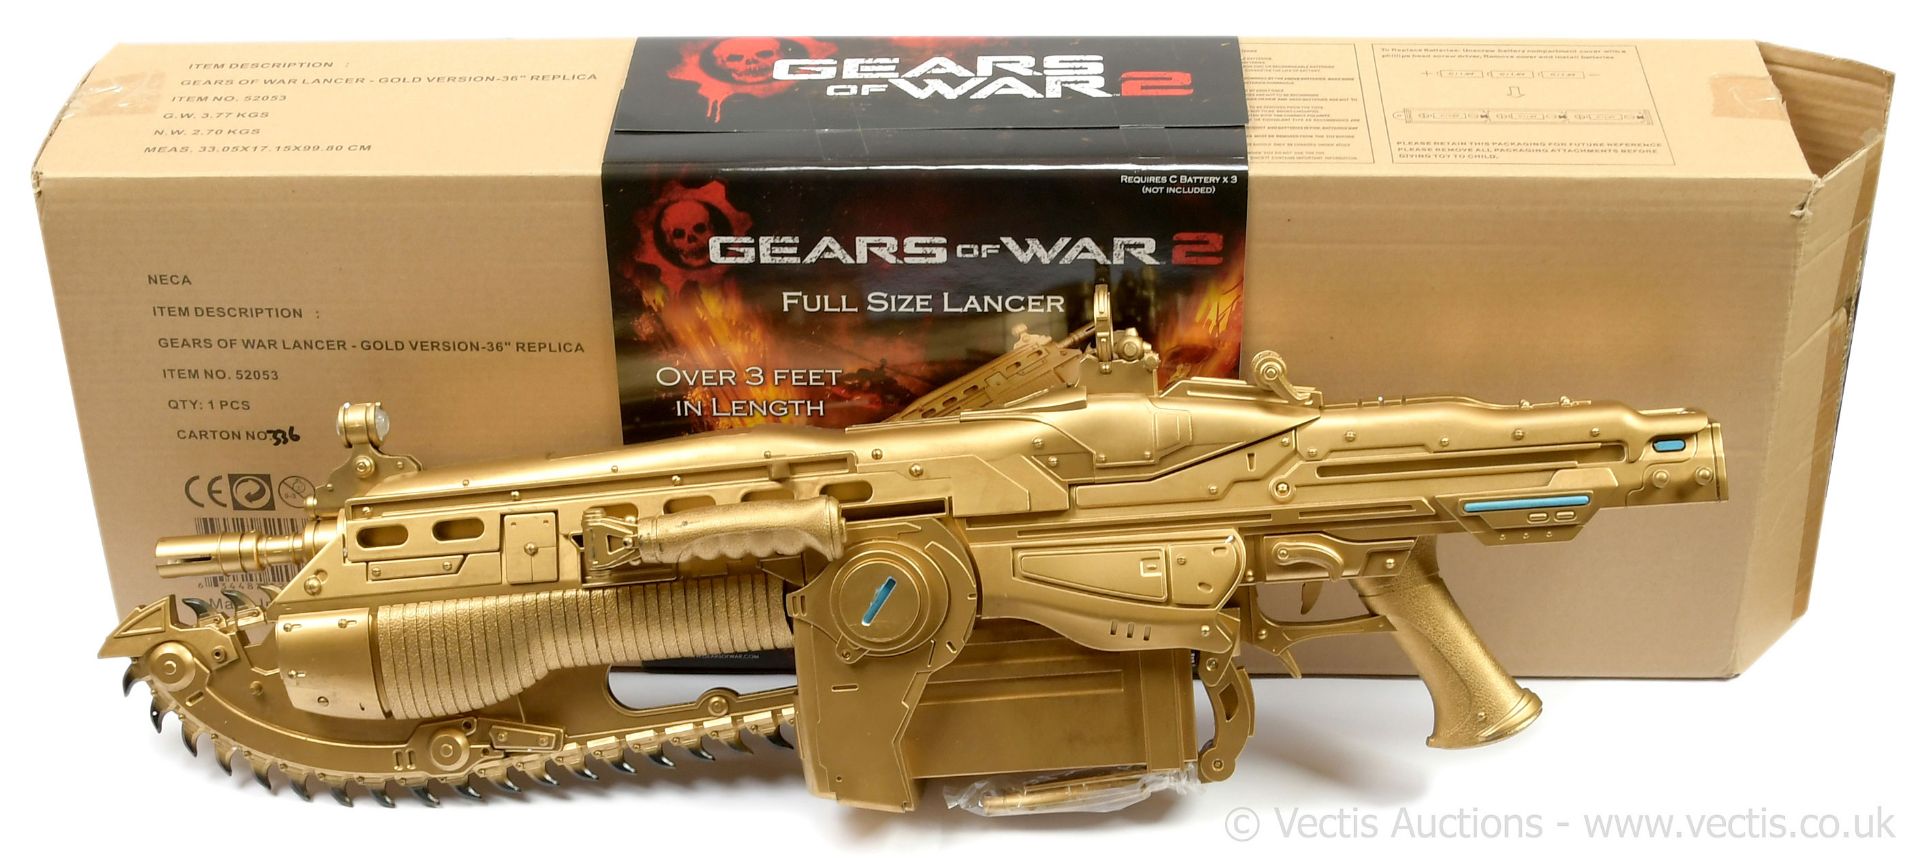 NECA Gears of War 2 1:1 Scale full size Lancer